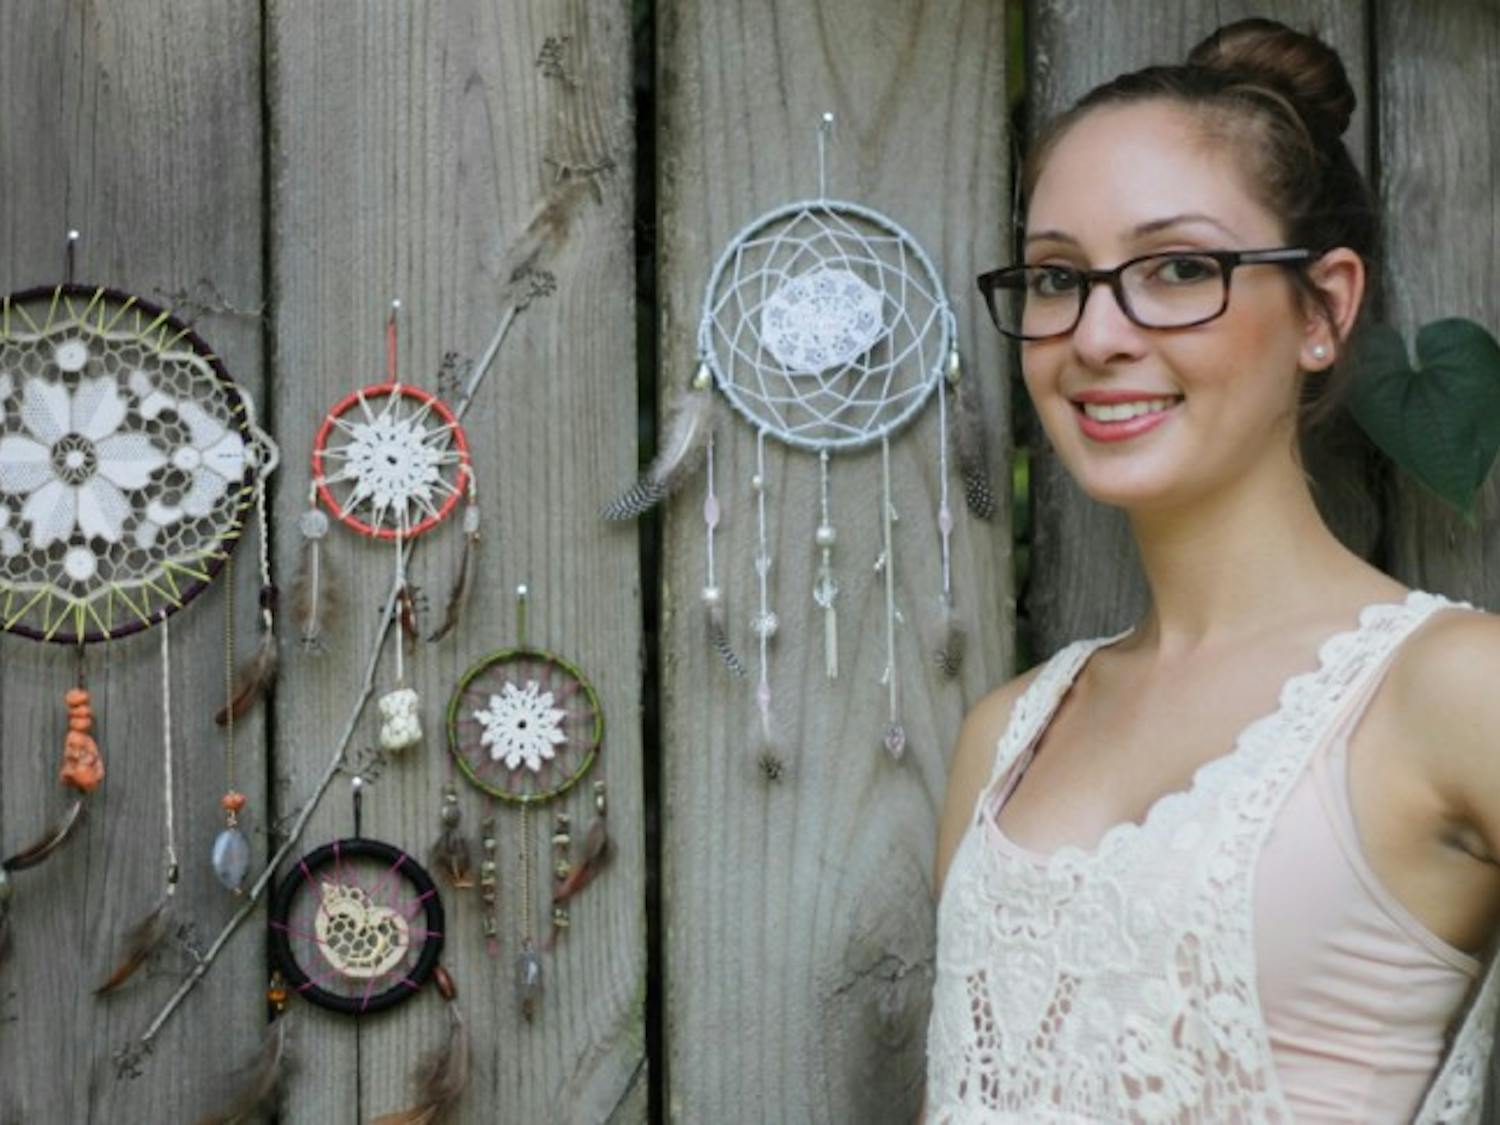 Victoria Miller, a 21-year-old art history senior, makes and sells dreamcatchers out of vintage doilies on the popular handmade goods marketplace, Etsy.com, under the name “REVIVE by Victoria.”